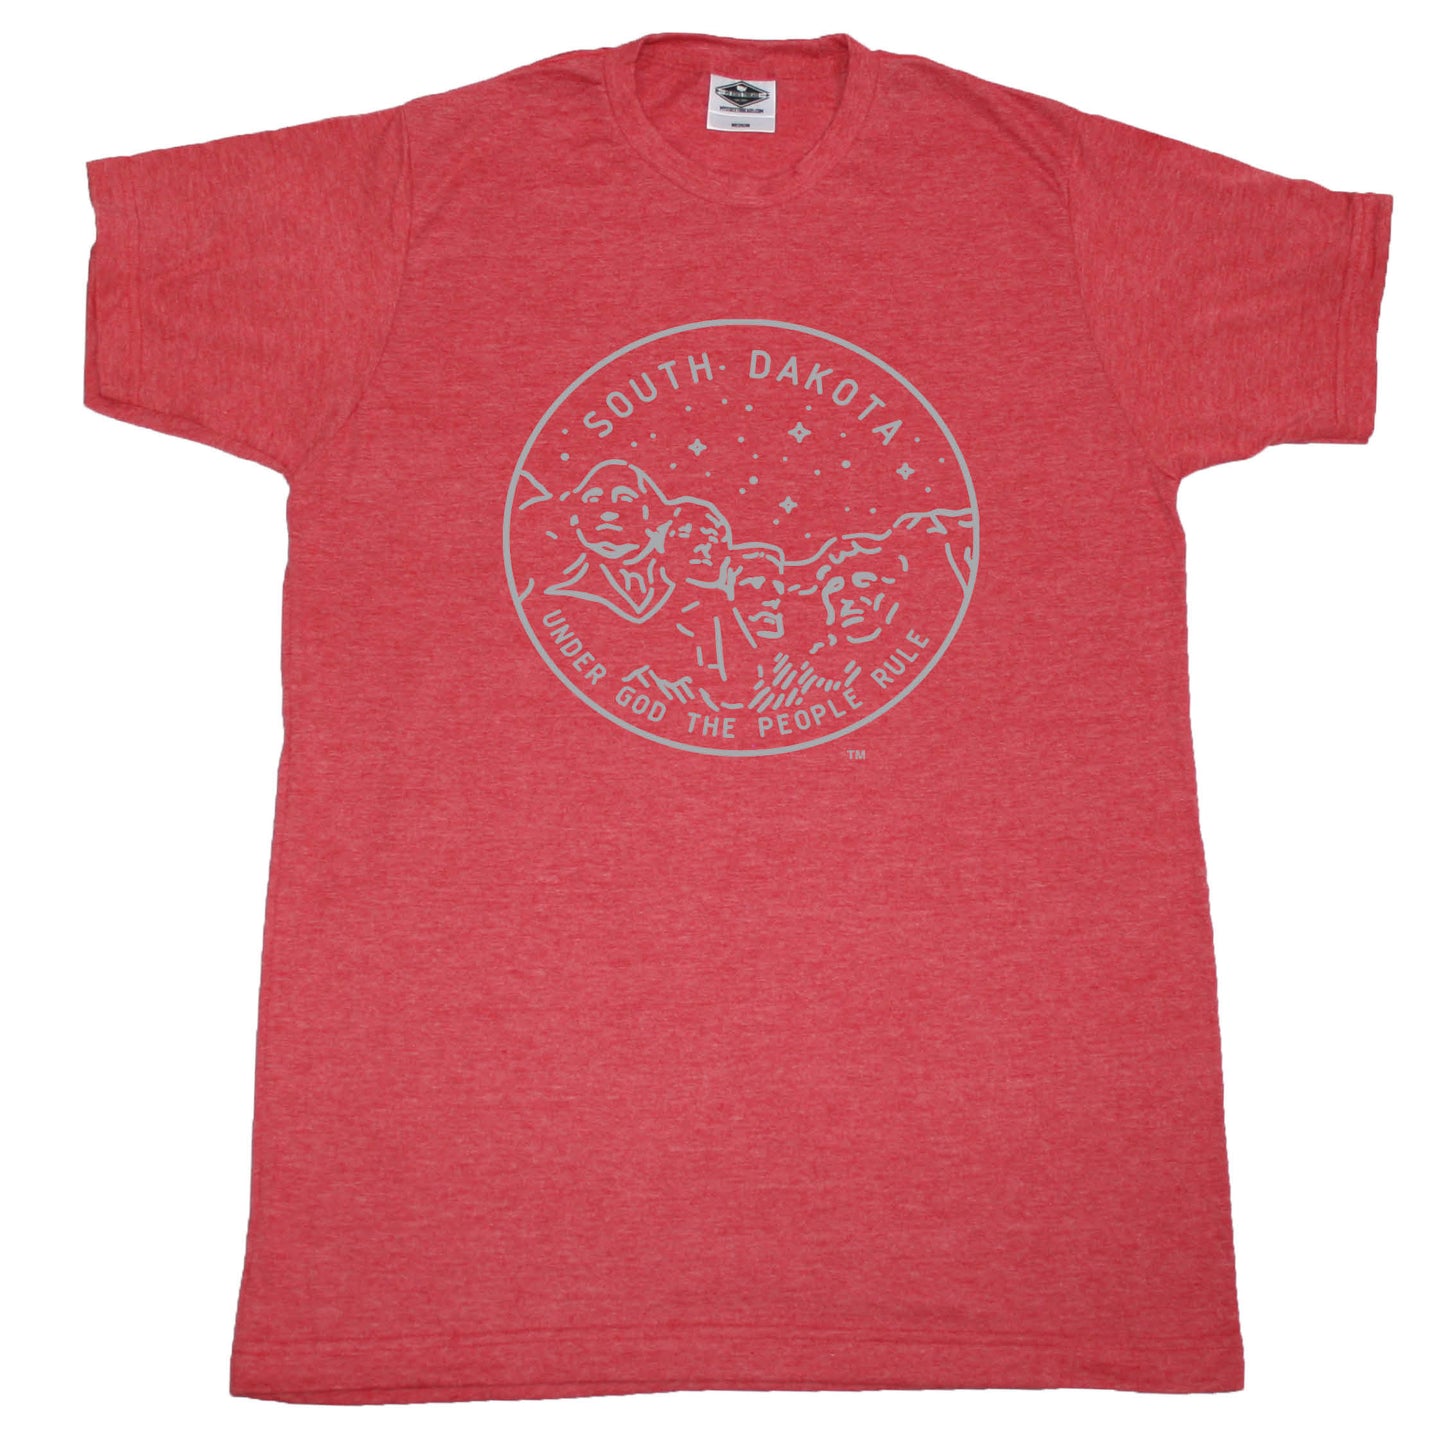 SOUTH DAKOTA RED TEE | STATE SEAL | UNDER GOD THE PEOPLE RULE